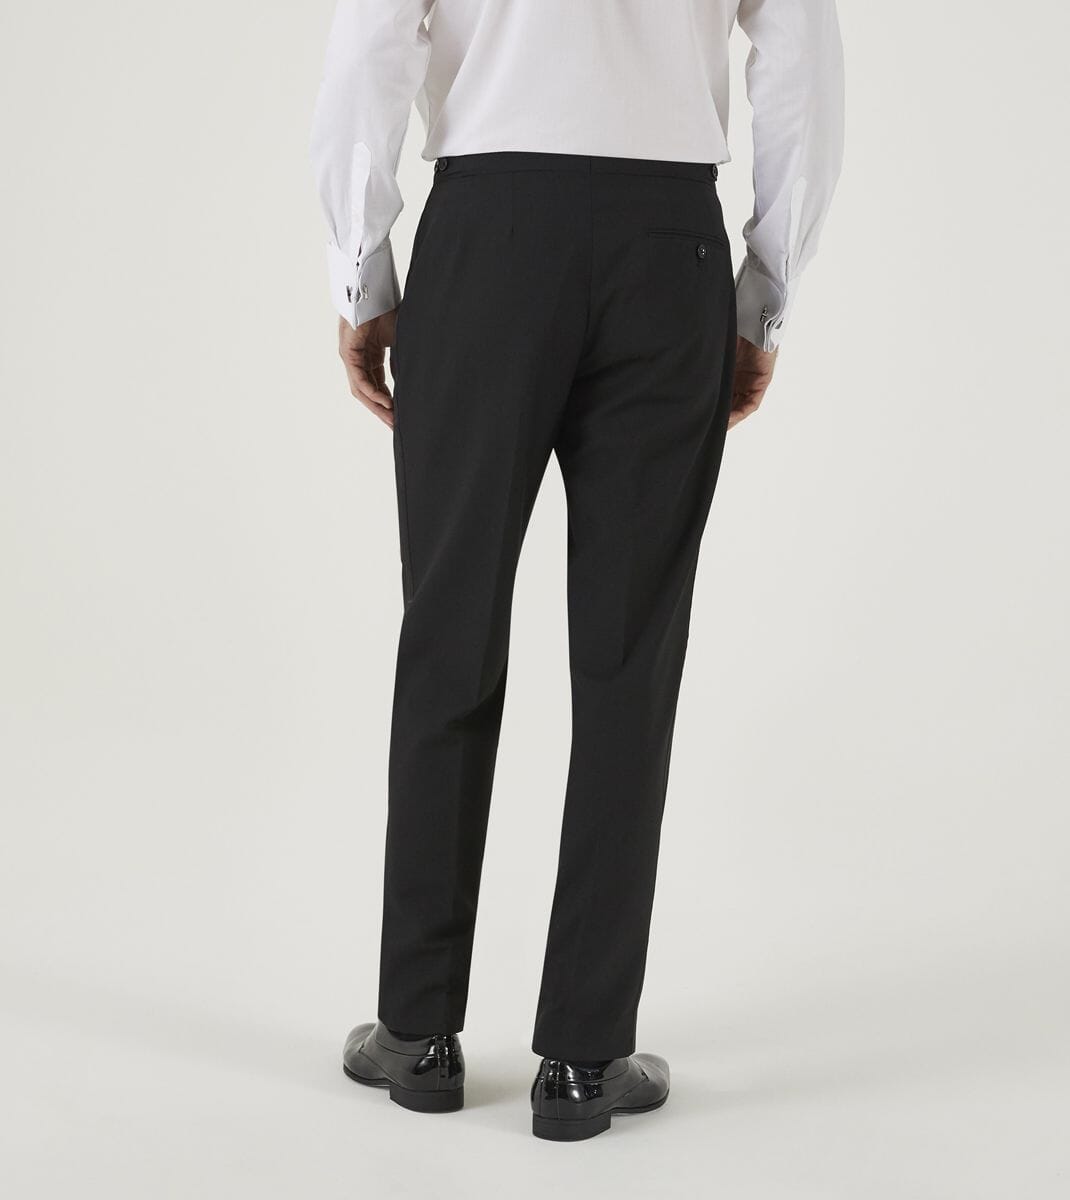 Cavendish Black Dinner Suit Trousers - Trousers - - THREADPEPPER